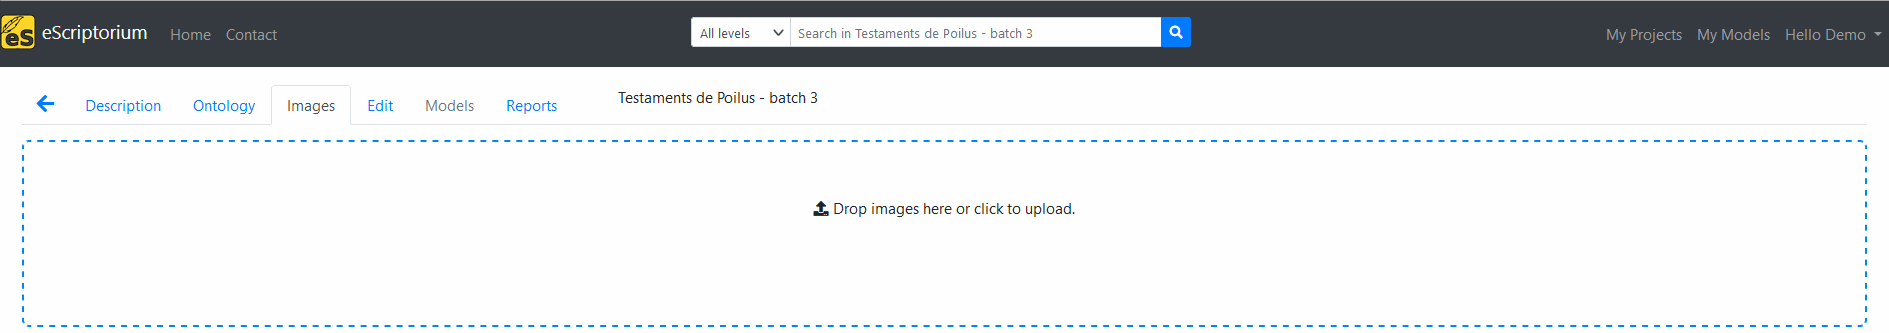 image: Screenshot of the search bar on the projects page